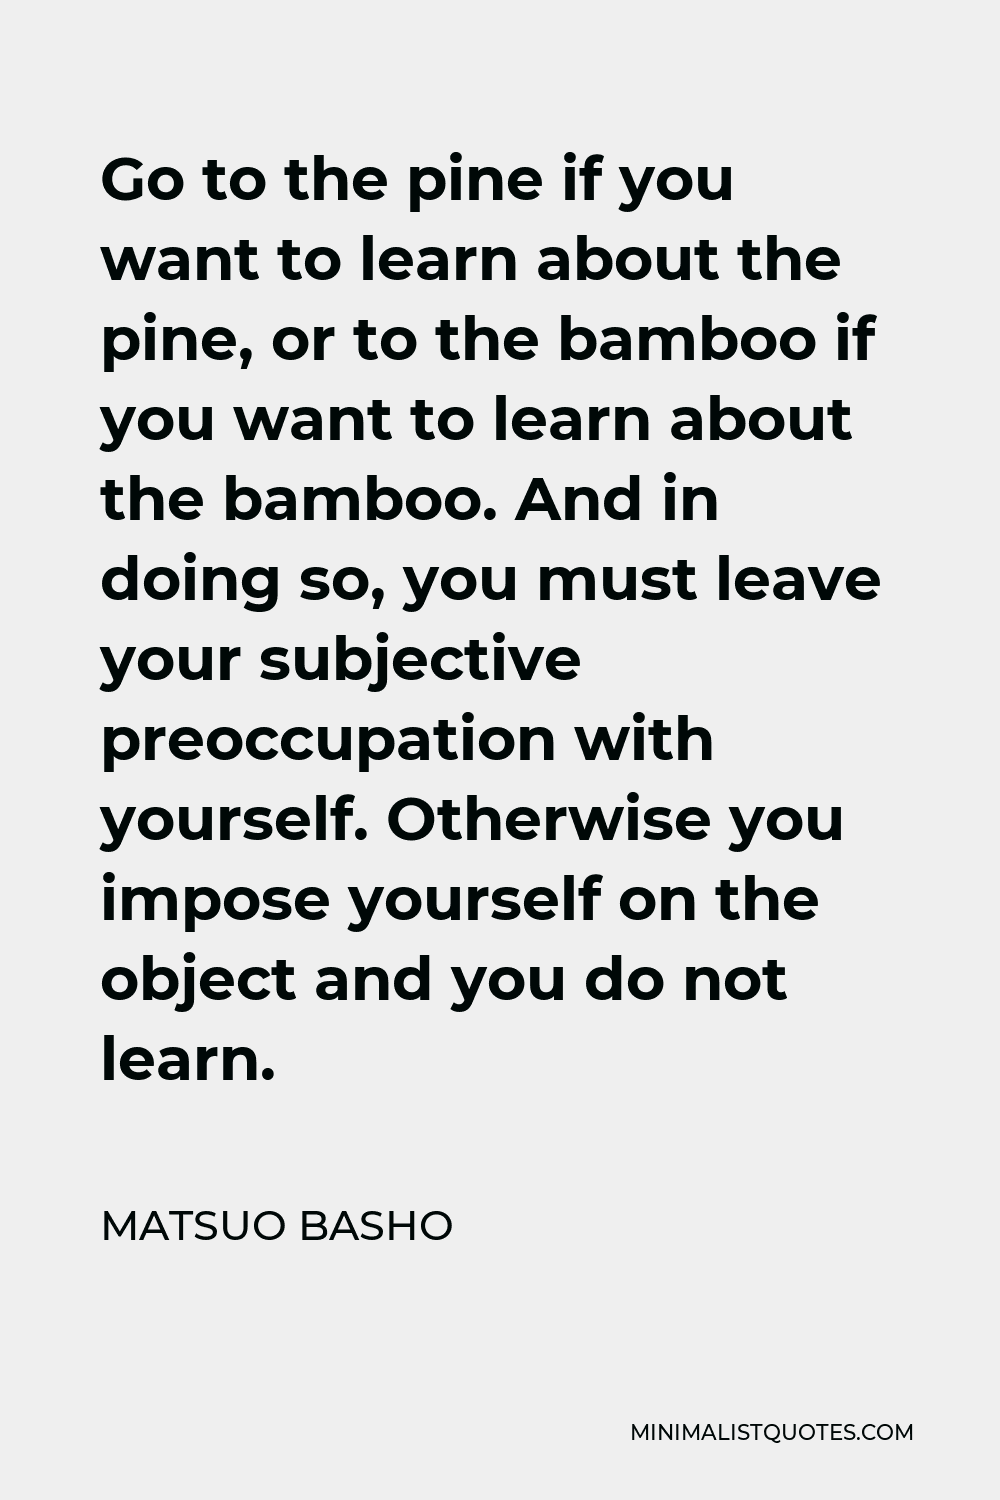 Matsuo Basho Quote - Go to the pine if you want to learn about the pine, or to the bamboo if you want to learn about the bamboo. And in doing so, you must leave your subjective preoccupation with yourself. Otherwise you impose yourself on the object and you do not learn.